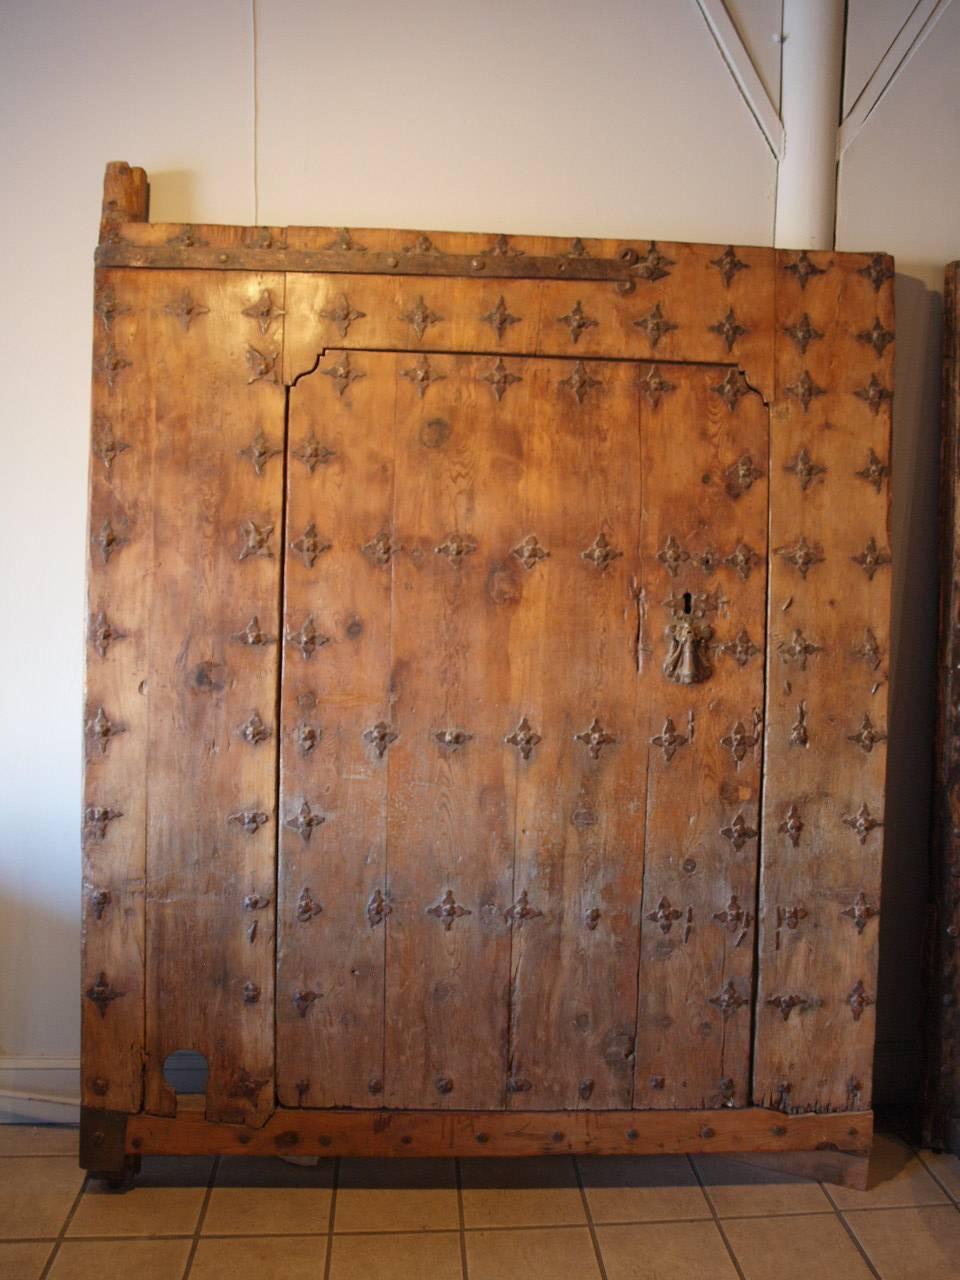 Exceptional and monumental 17th century Spanish entry door. Wonderfully constructed from Meleze wood - a very hard pine. Outstanding iron ornamentation with massive hinges, a spectacular knocker and flower-like studs. To the backside, the inner door